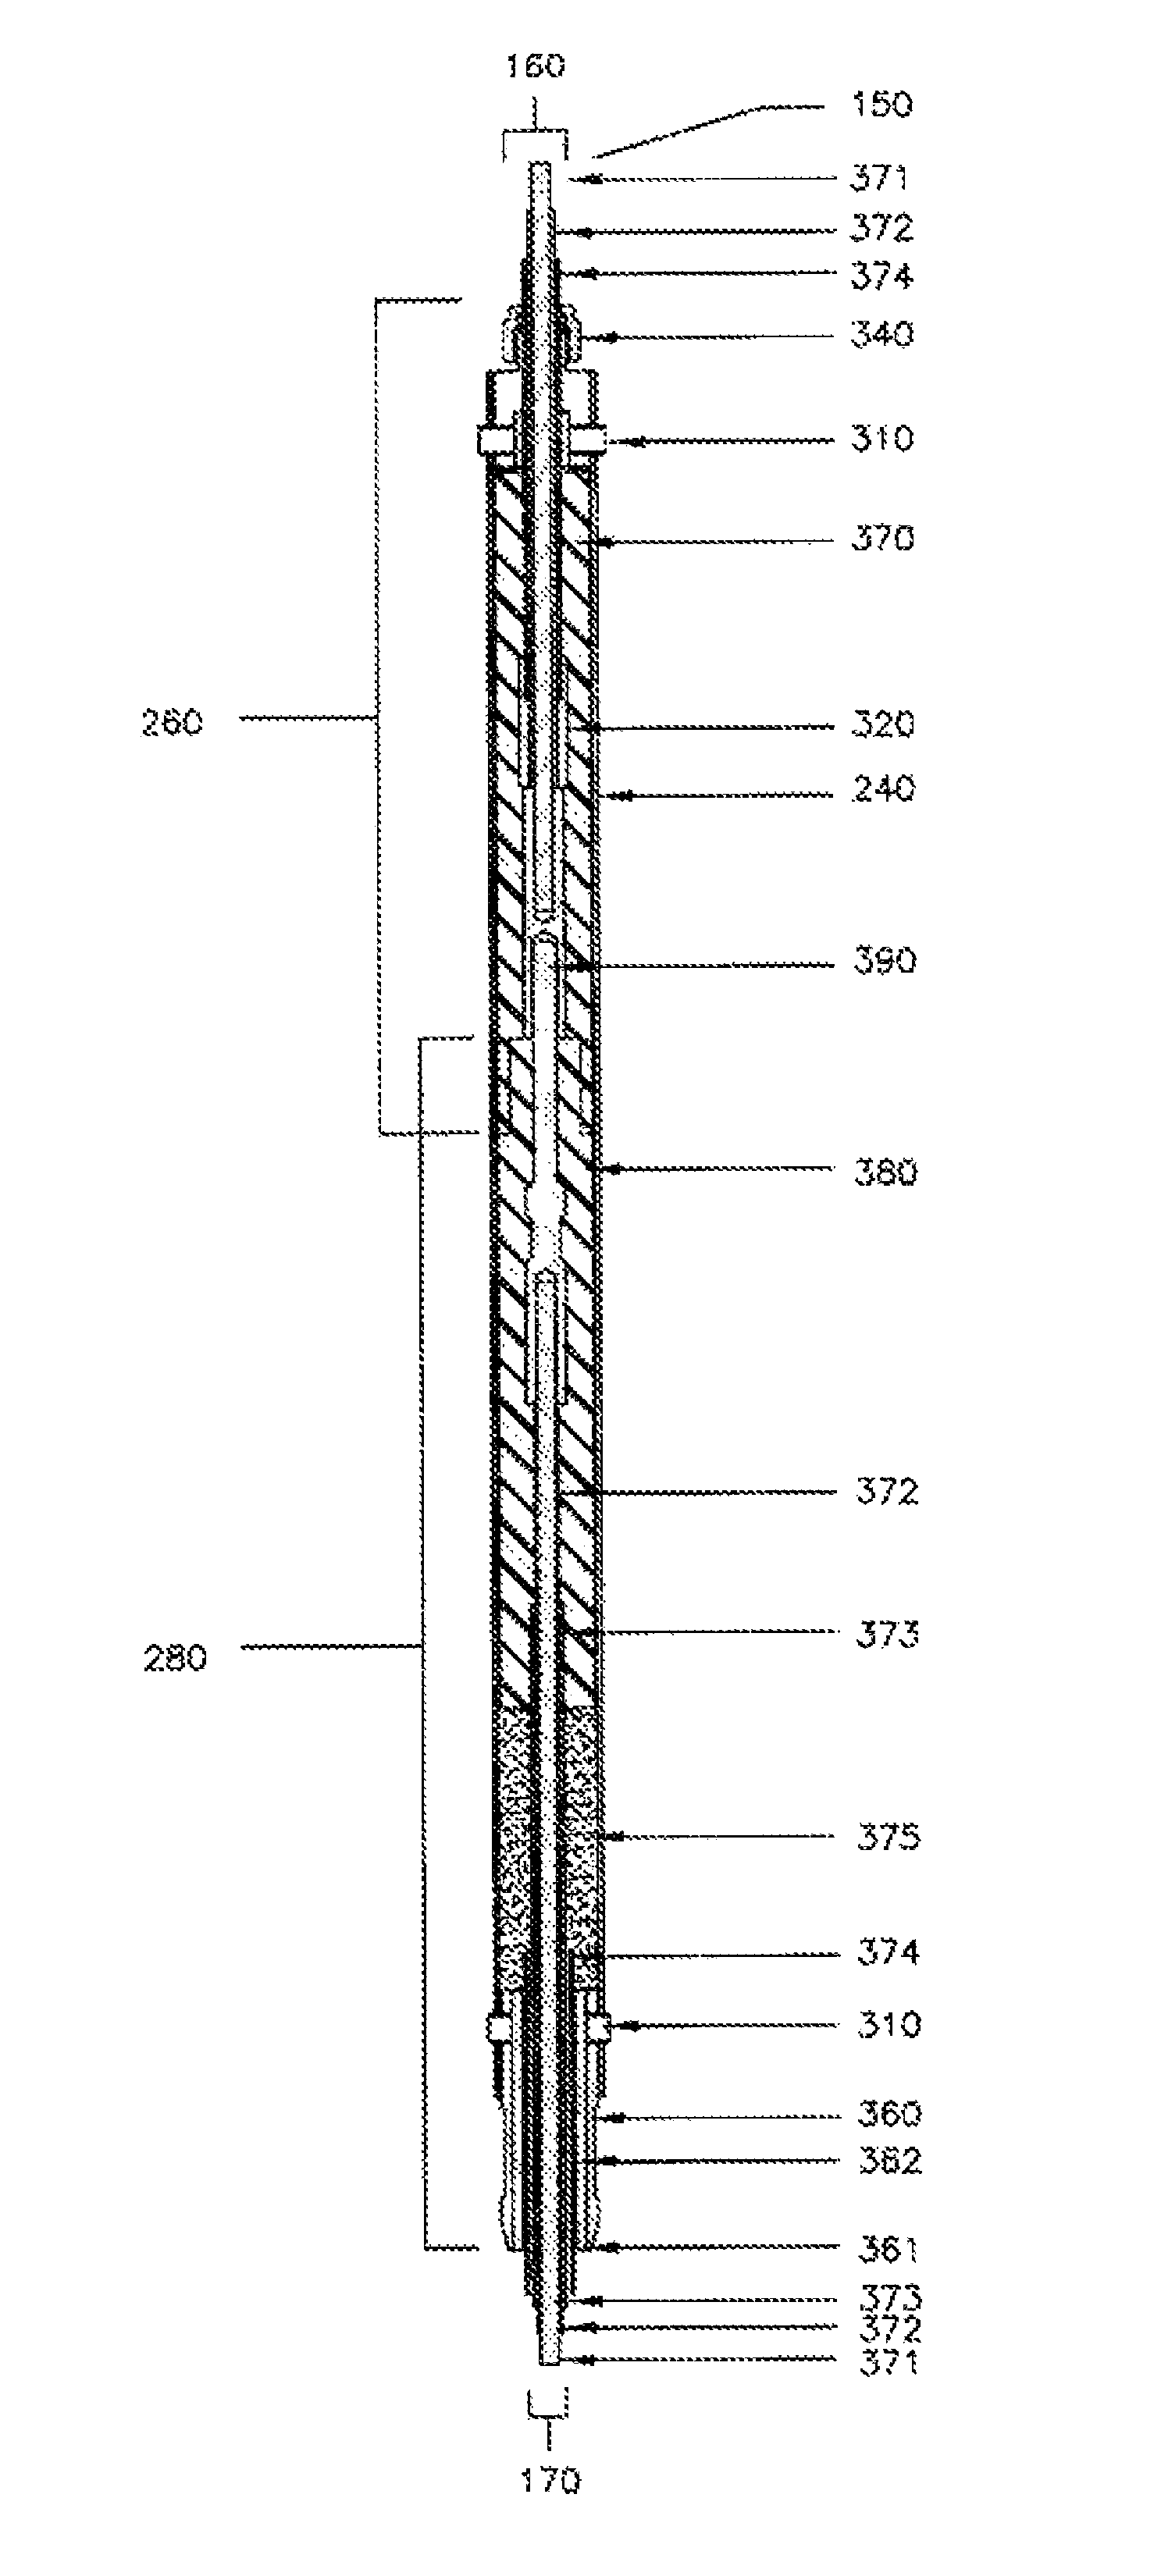 Down hole electrical connector and method for combating rapid decompression